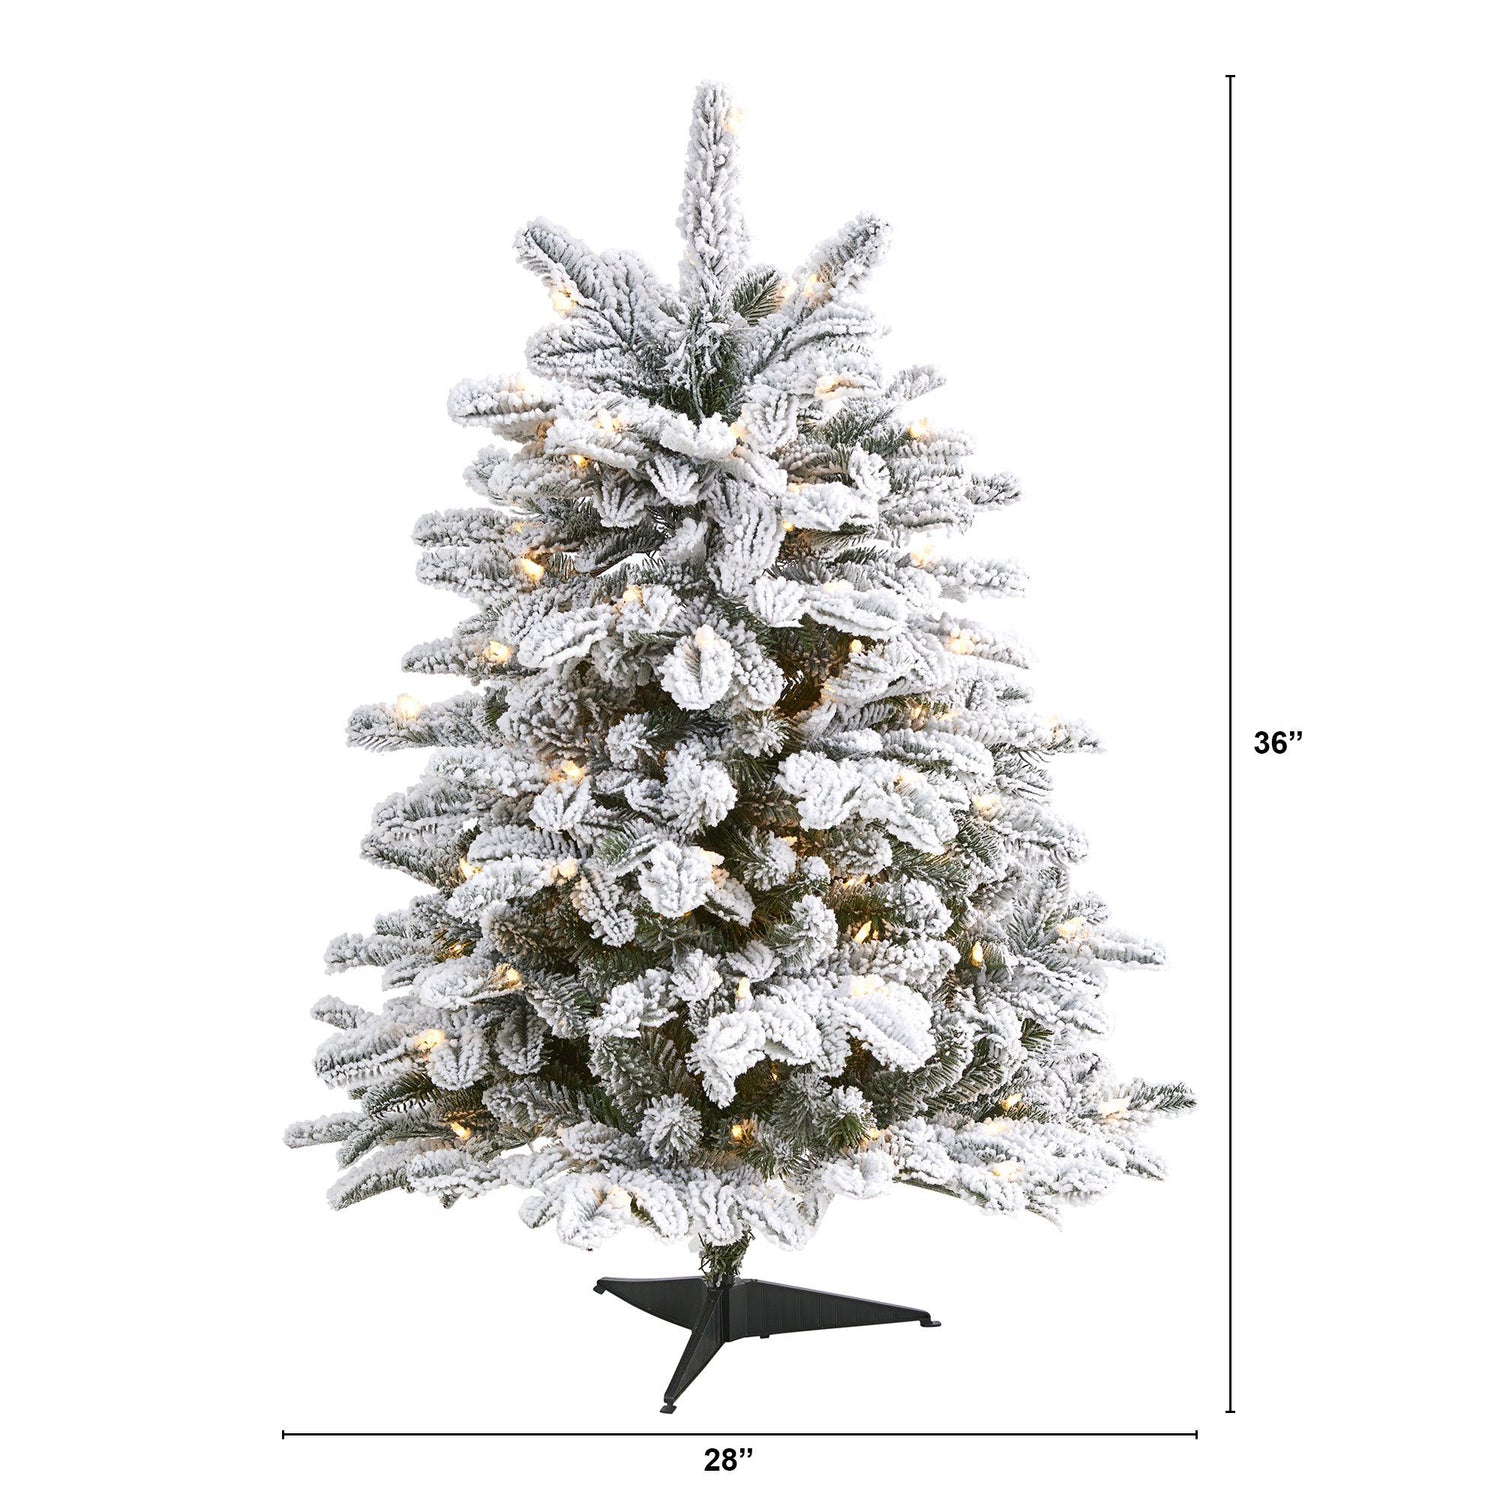 3’ Flocked North Carolina Fir Artificial Christmas Tree with 150 Warm White Lights and 545 Bendable Branche